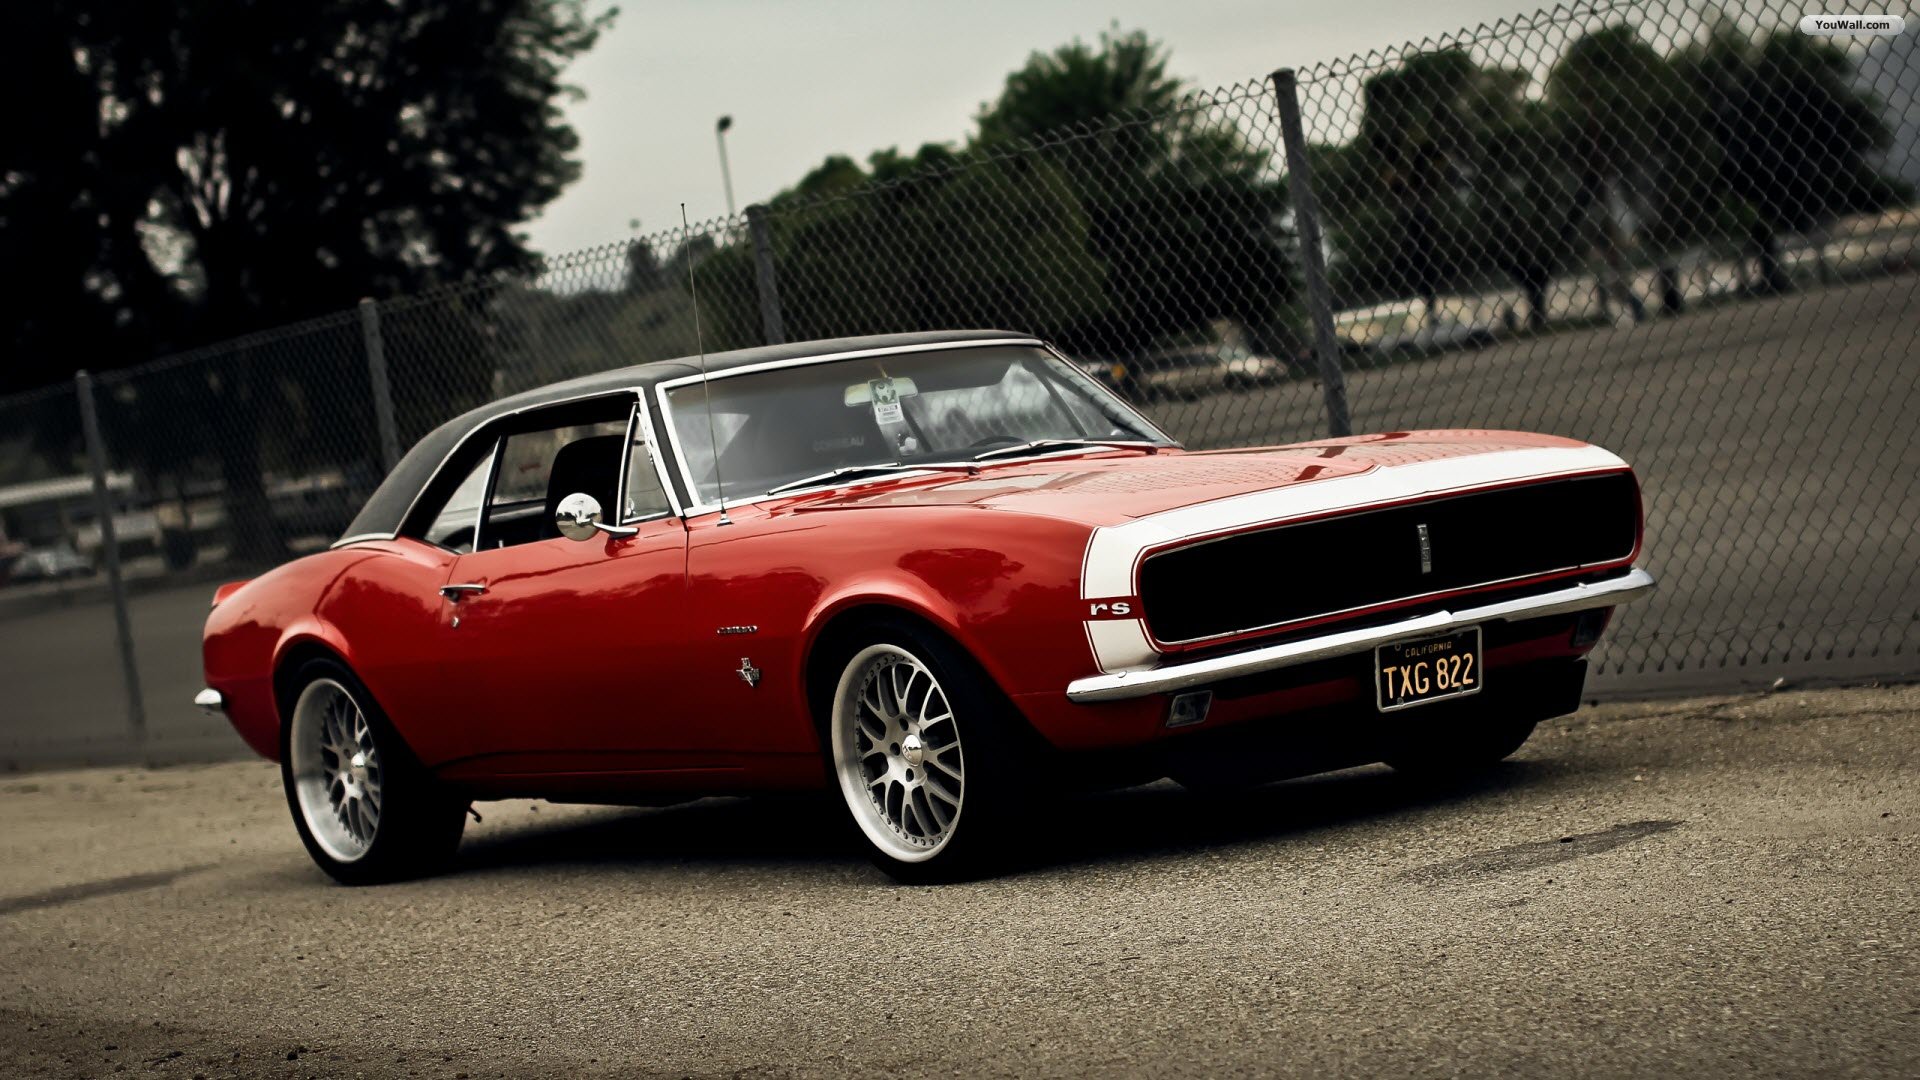 Home CarsHD Wallpapers Classic Muscle Car Wallpapers